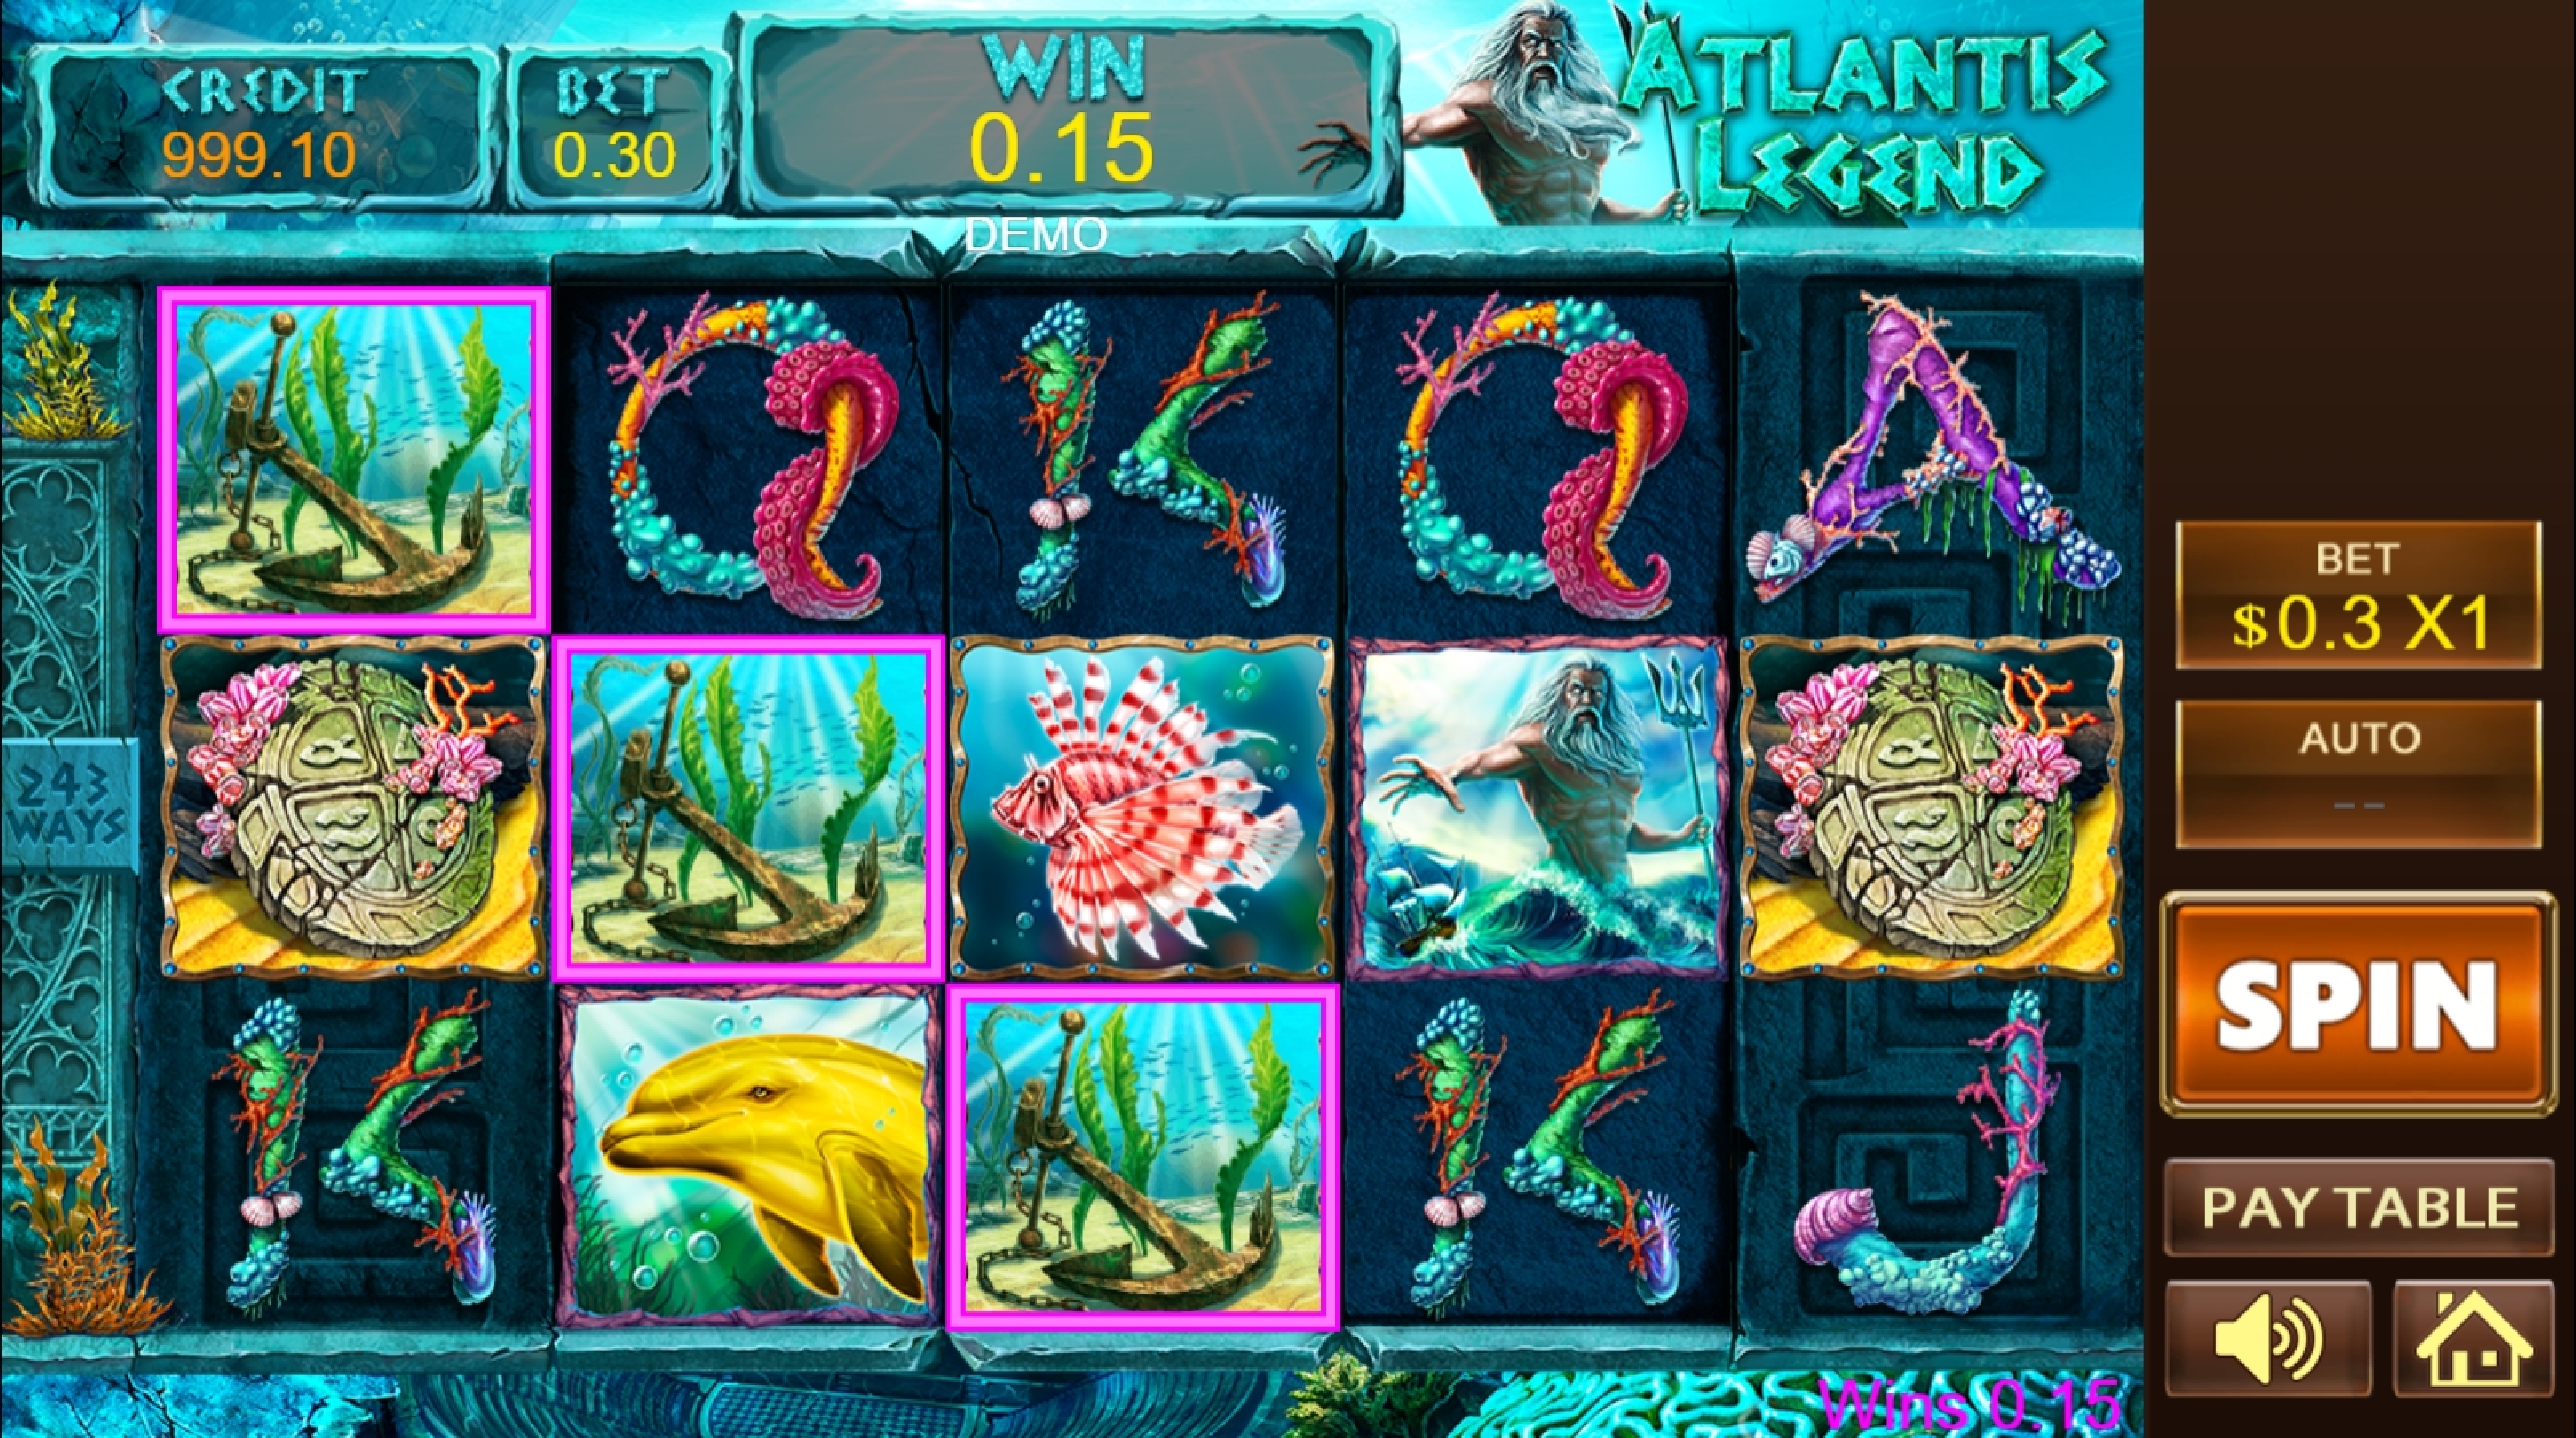 Win Money in Atlantis Legend Free Slot Game by PlayStar